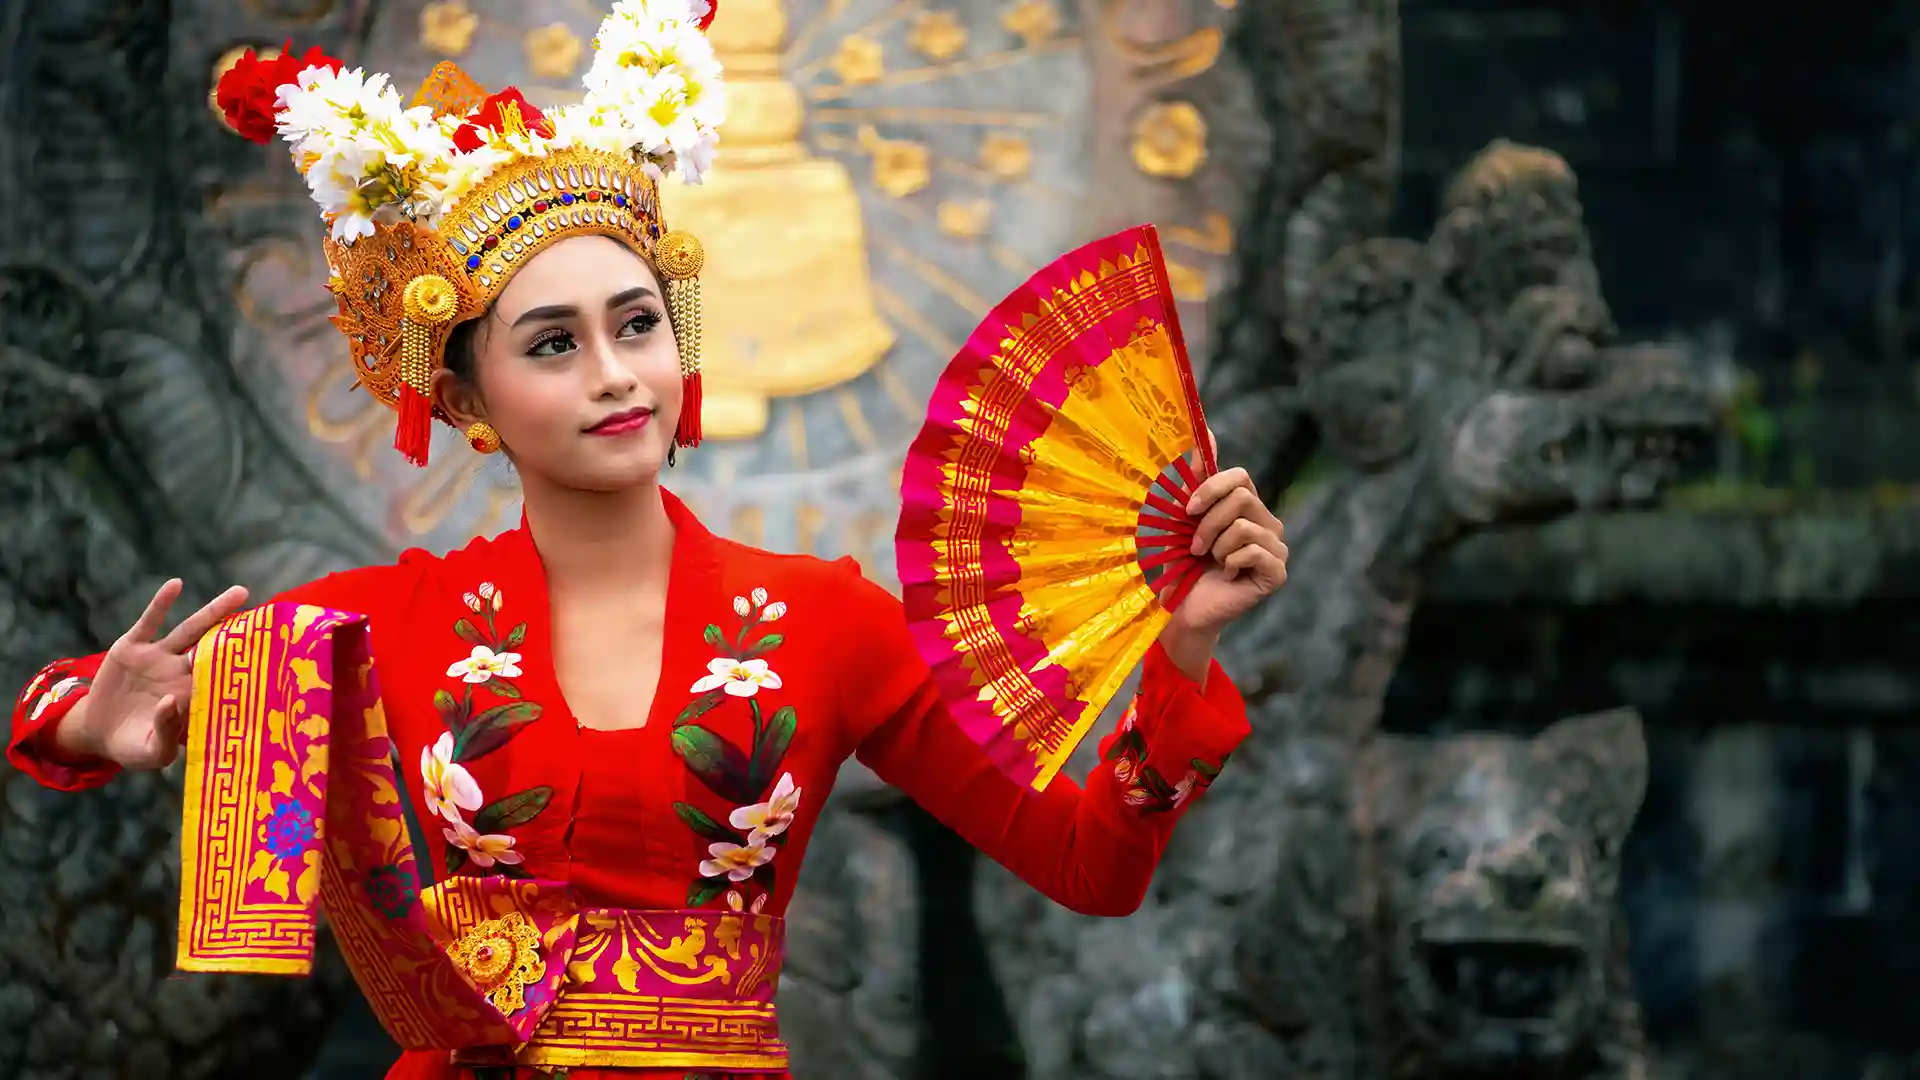 Person in embroidered red dress holding a red and yellow folding fan representing unique culture in Asia.